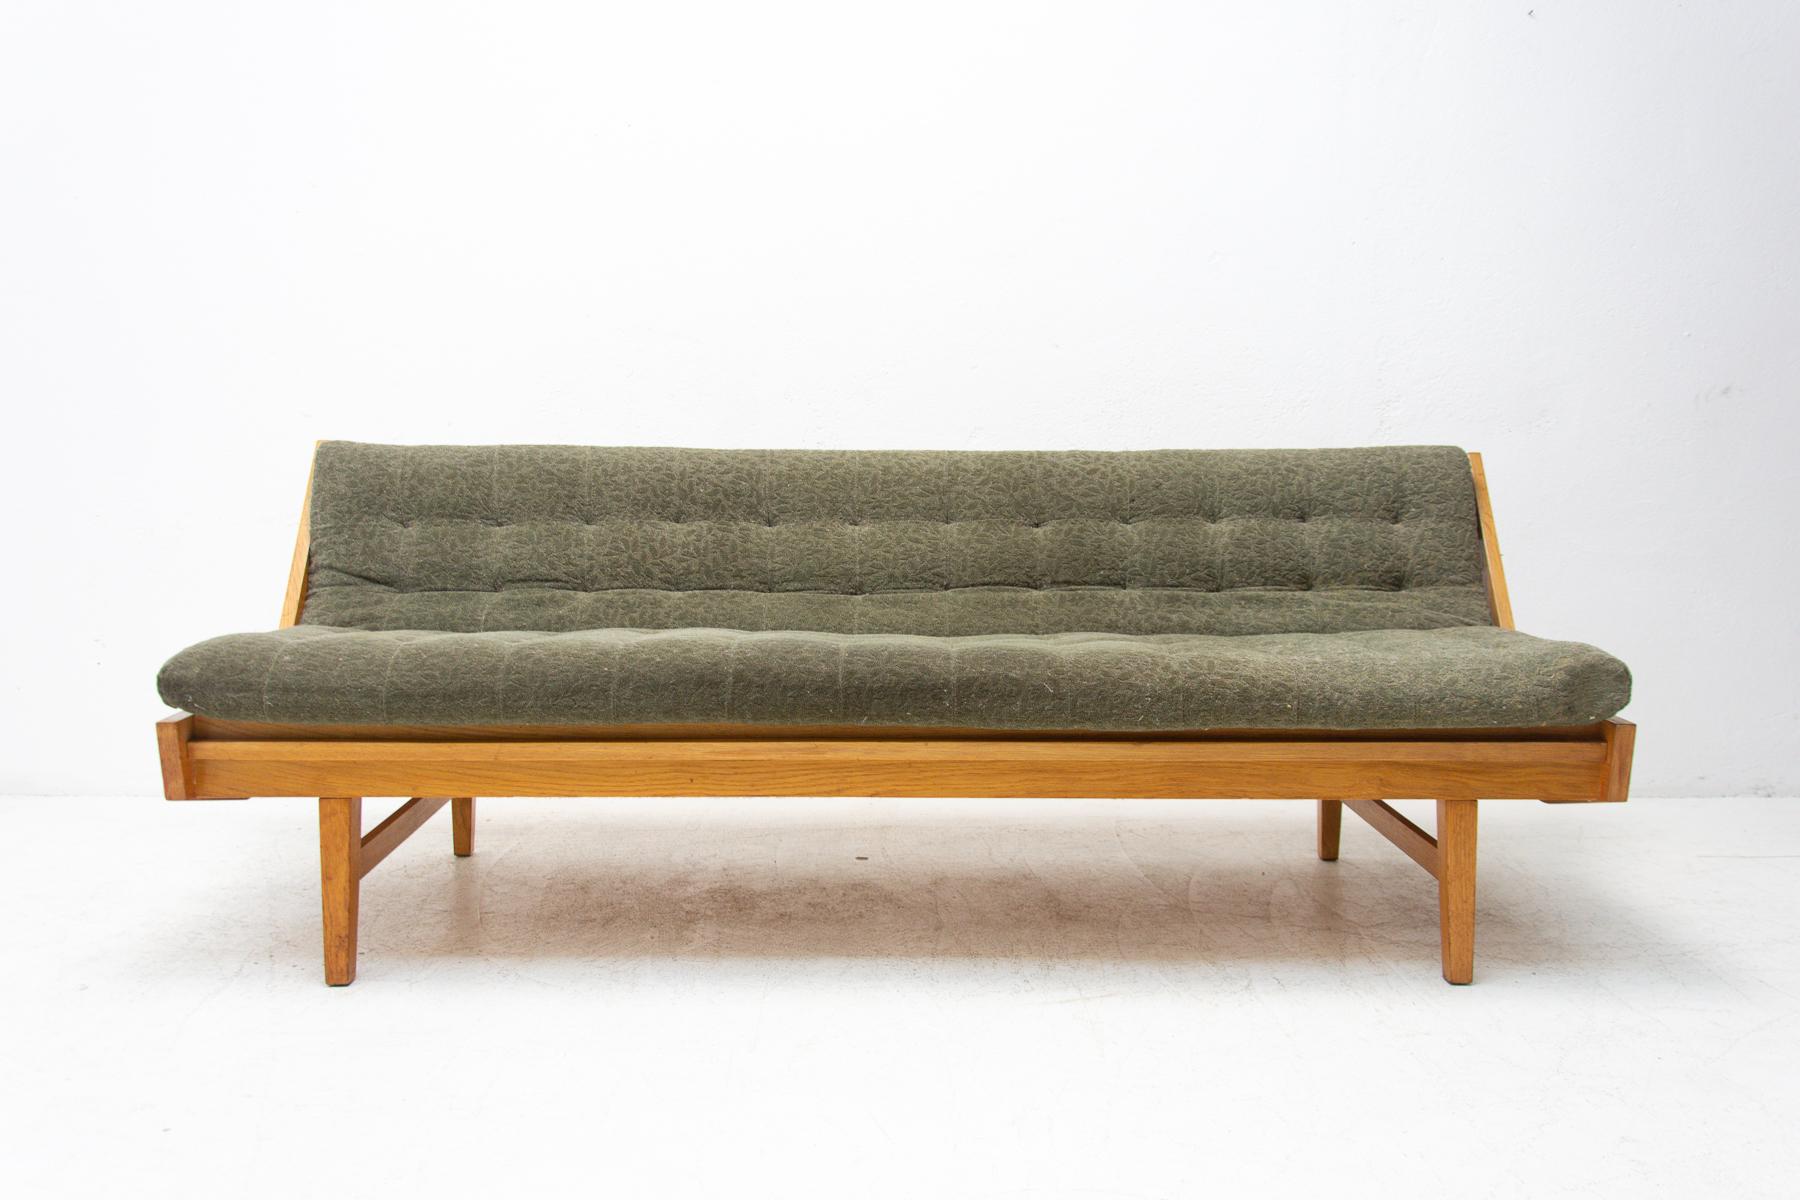 Mid century sofabed, made in the former Czechoslovakia in the 1960´s. This sofa features a wooden structure that is veneered in oak. The sofa is in very good original condition, shows slight signs of age and using.

Measures: Unfolded: 182 x 80